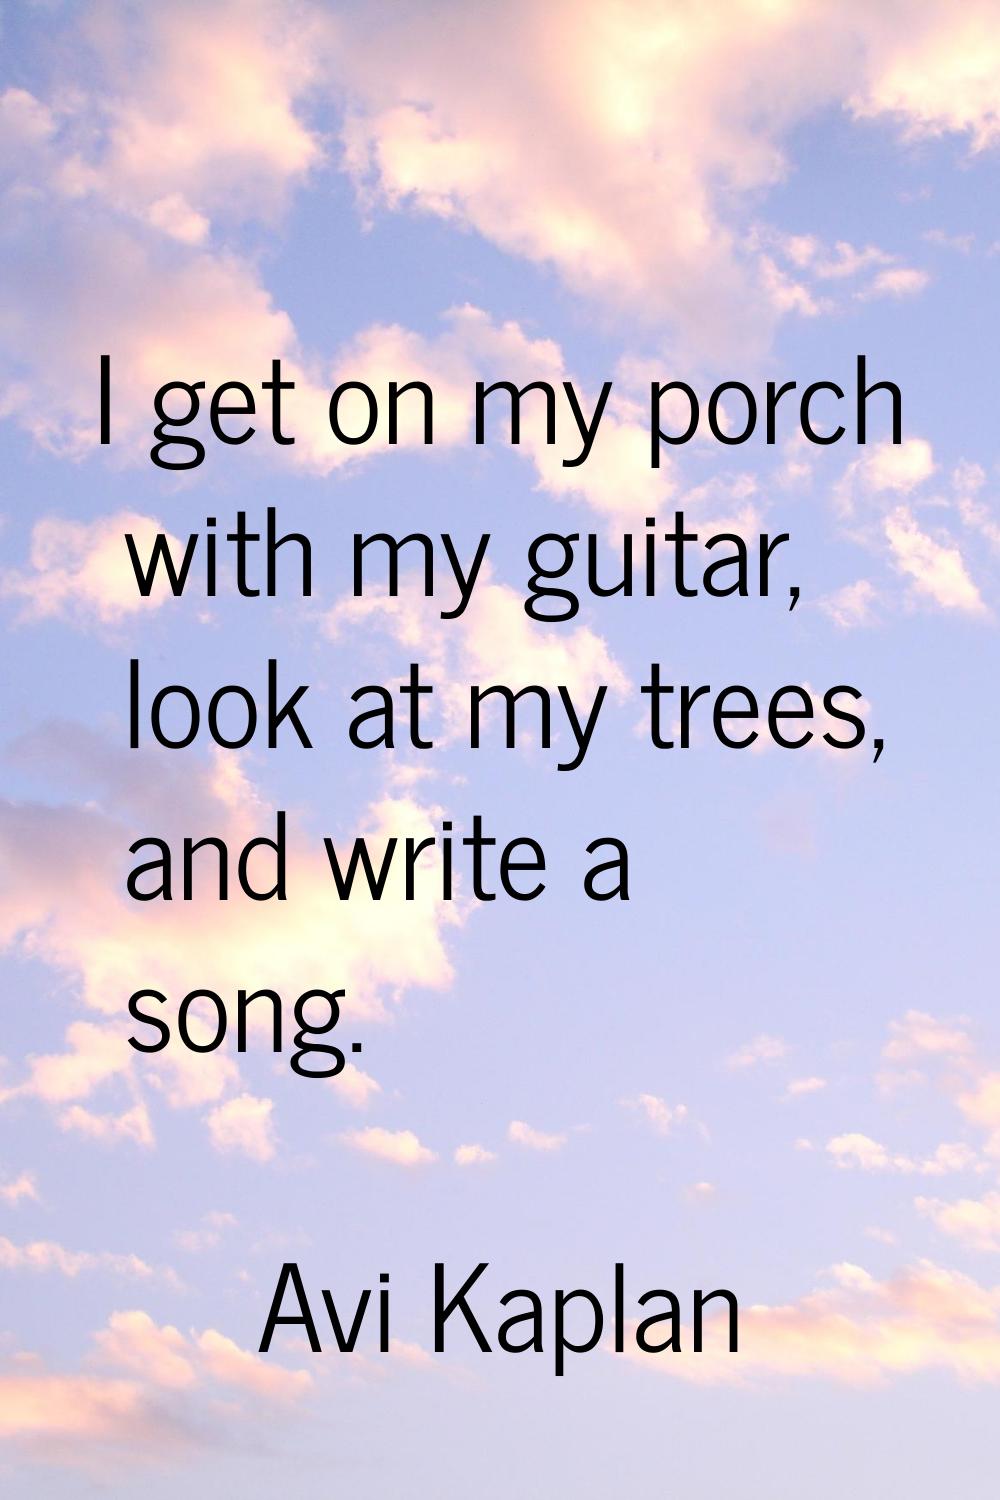 I get on my porch with my guitar, look at my trees, and write a song.